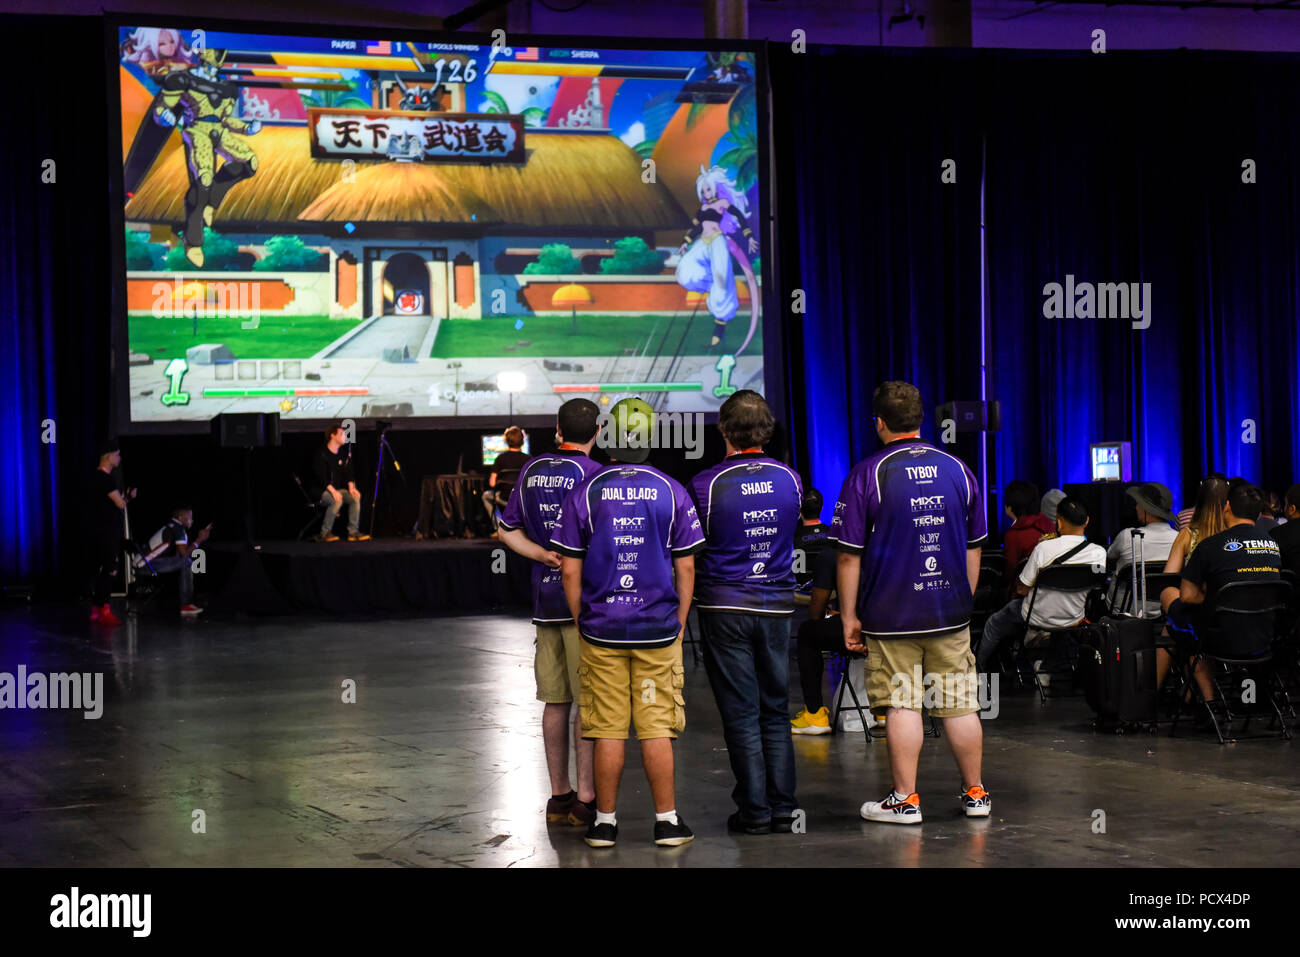 Las Vegas, Nevada. August 3, 2018. Participants check out the competition in Tekken 7 at the 2018 Evolution Championship Series, EVO, sponsored by Shoryuken and held at the Mandalay Bay Convention Center in Las Vegas, Nevada. Credit: Ken Howard Images/Alamy Live News Stock Photo